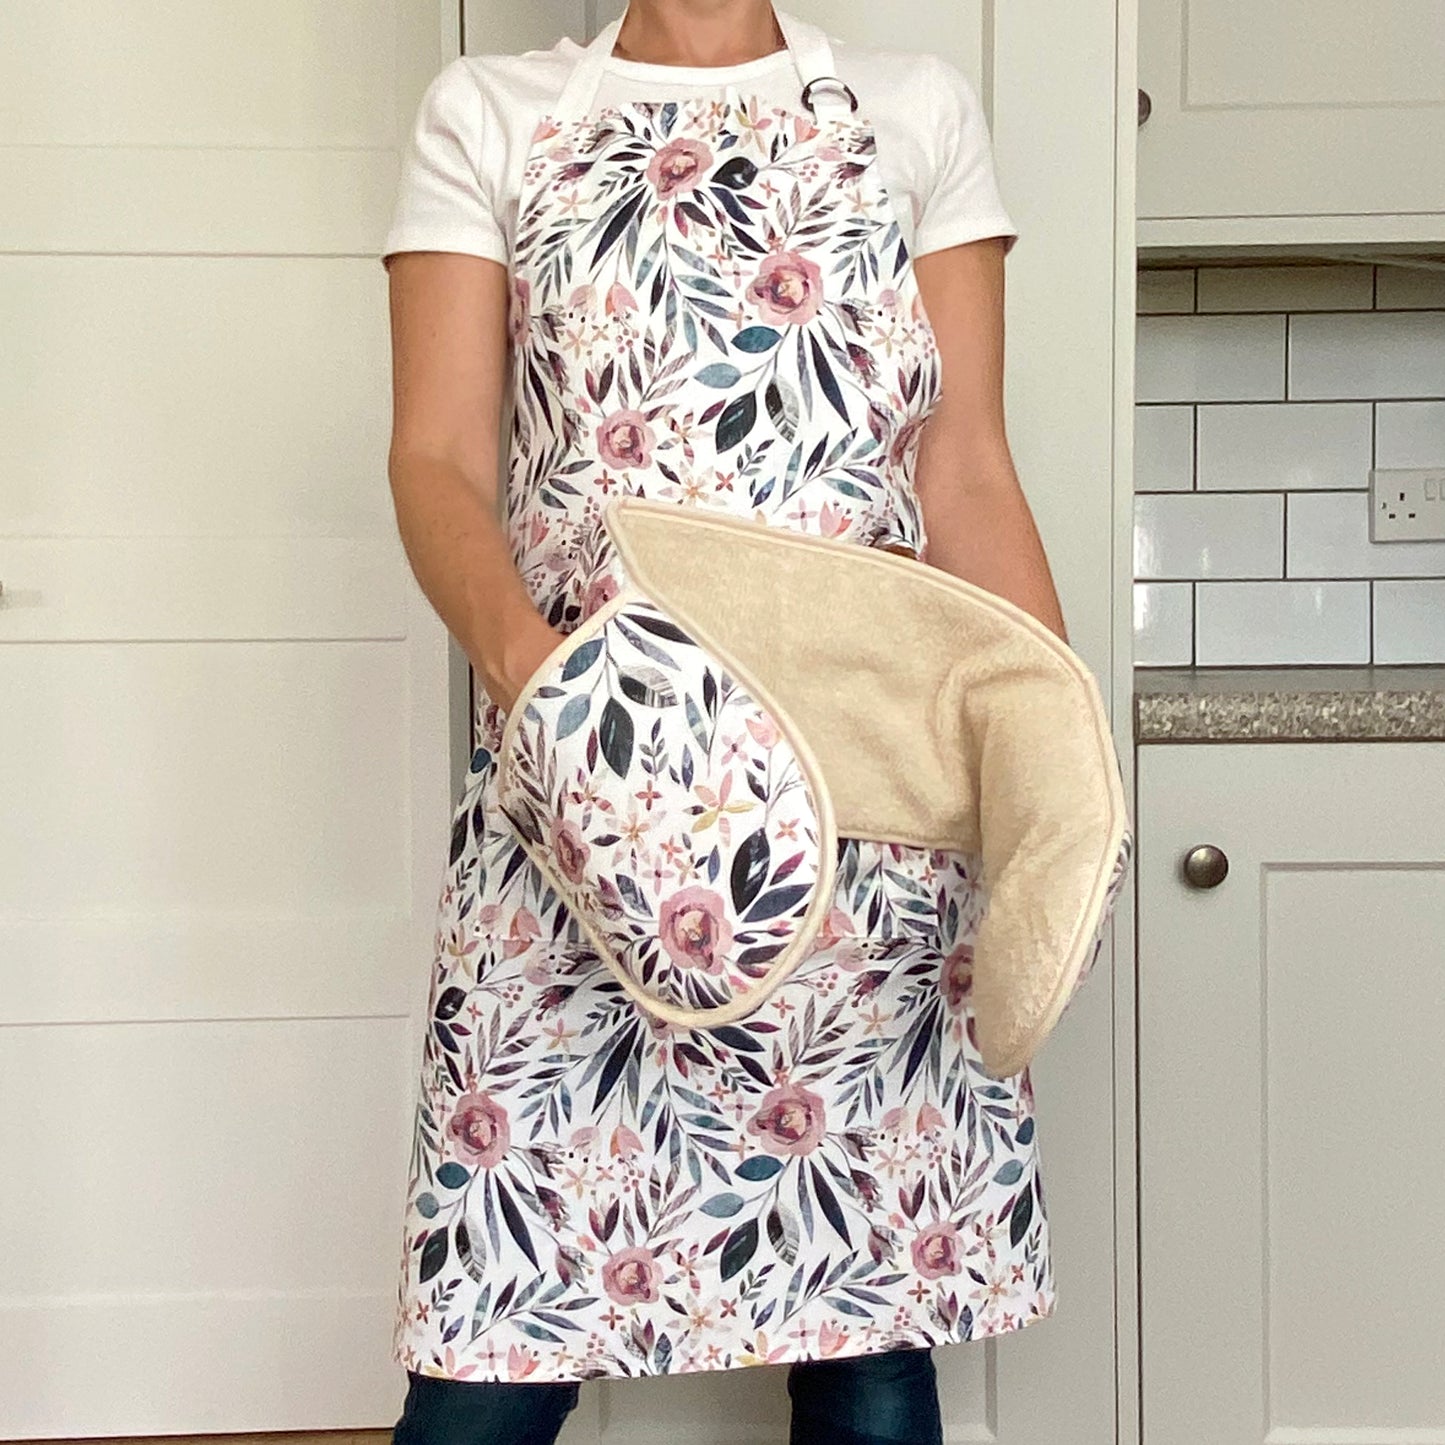 Model wears a pink and green summer floral apron, she also has a pain of matching double Oven Gloves on her hands.